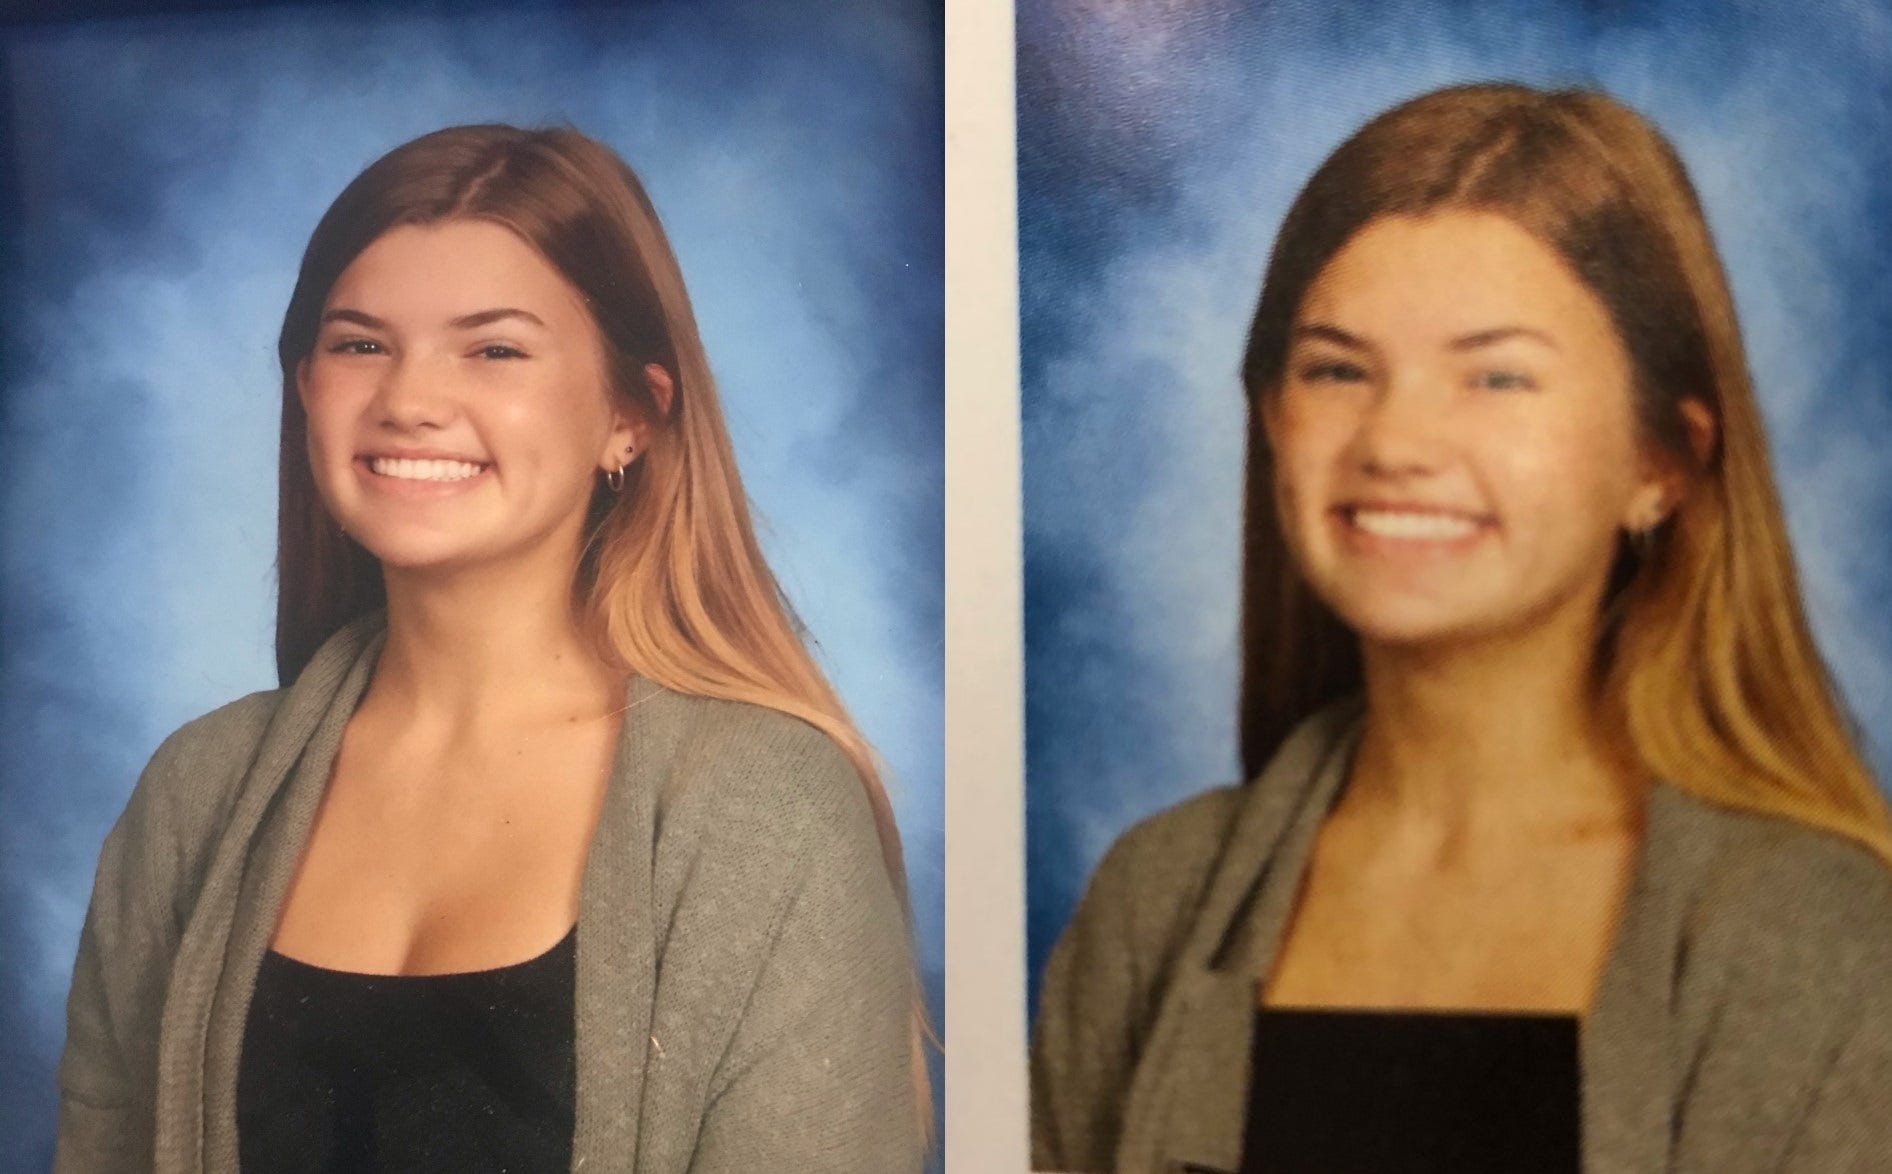 Sexist Dress Codes And Altered Yearbook Photos Teach Girls Body Shame 6366